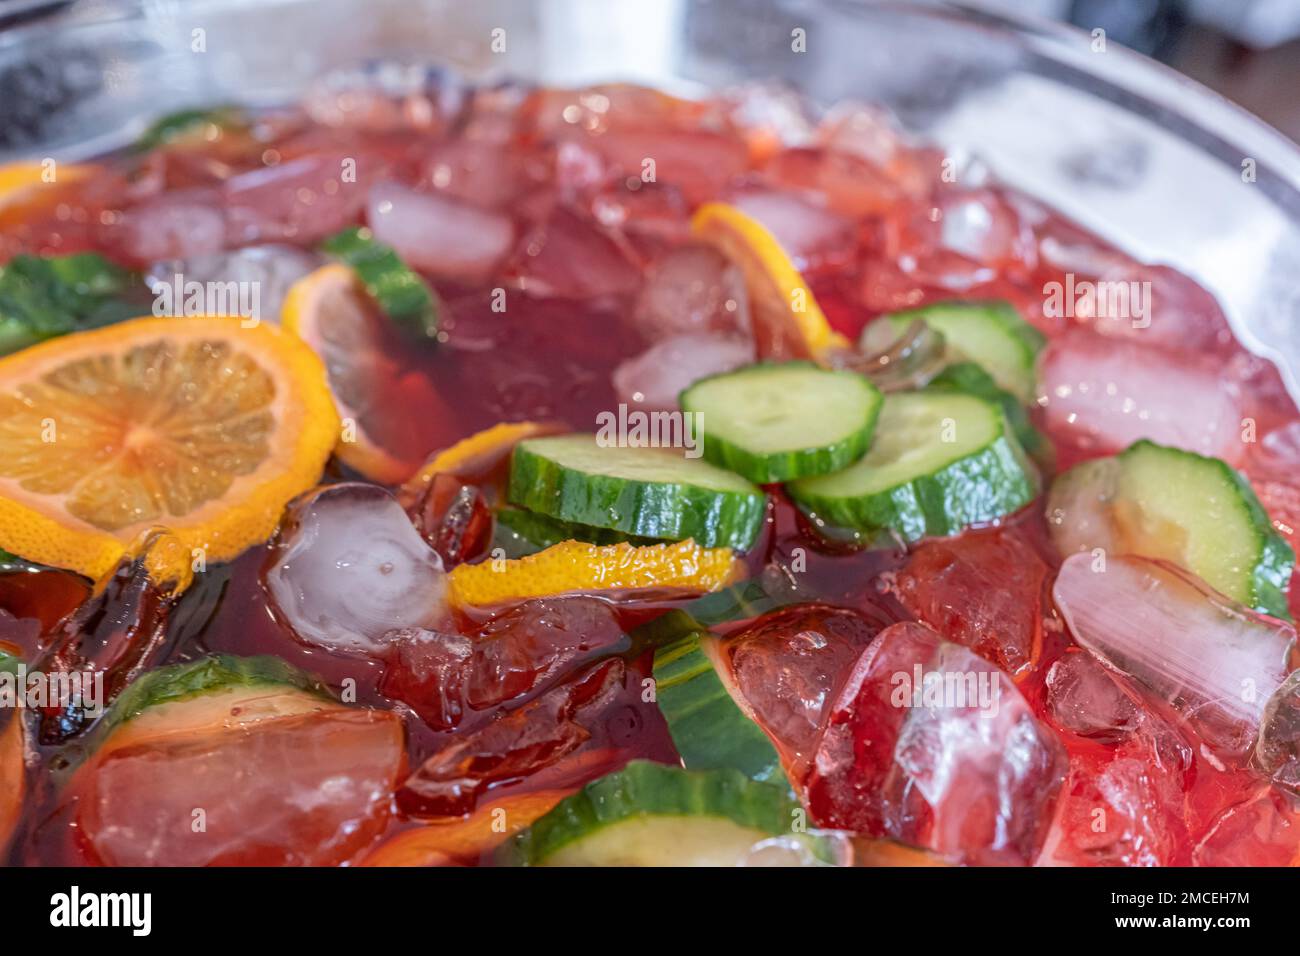 https://c8.alamy.com/comp/2MCEH7M/non-alcoholic-fruit-punch-in-dispenser-ready-to-drink-2MCEH7M.jpg